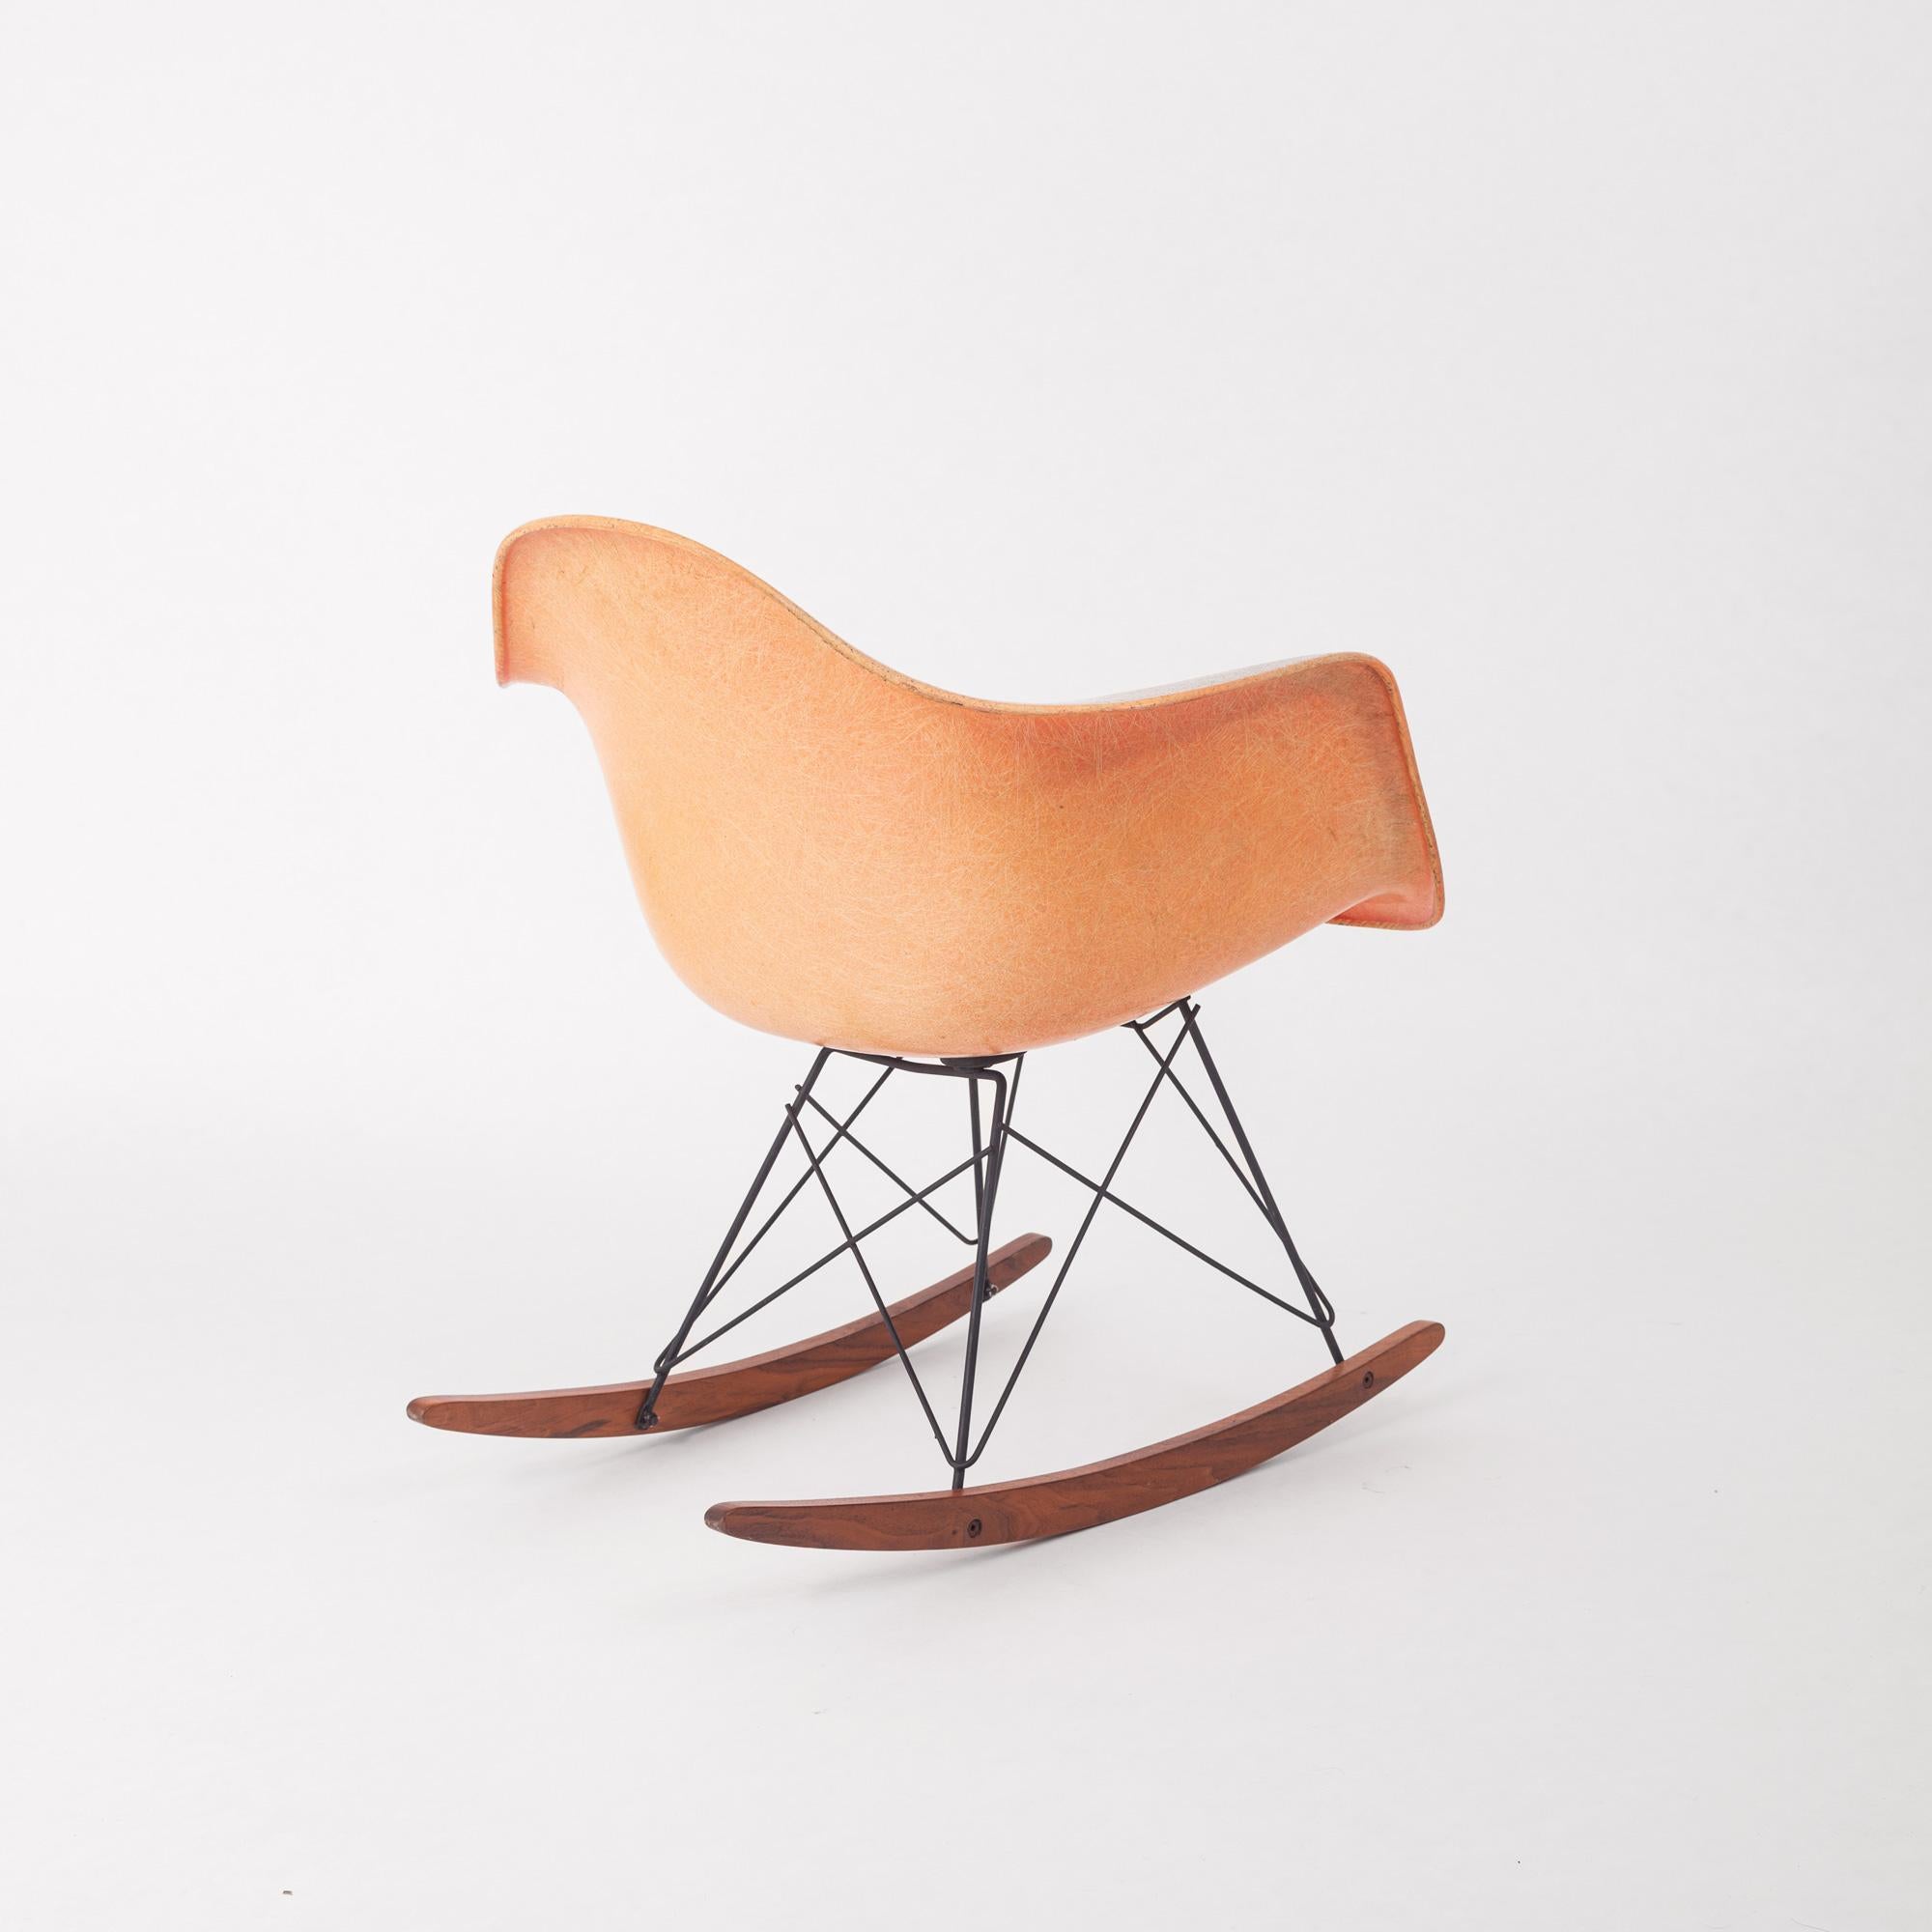 Known as the RAR rocking chair designed by Charles & Ray Eames, this chair has Zenith checker label and is the first generation produced in Zenith Plastic Factory in Gardena, California between 1950 and 1953. This 1st red orange edition has a